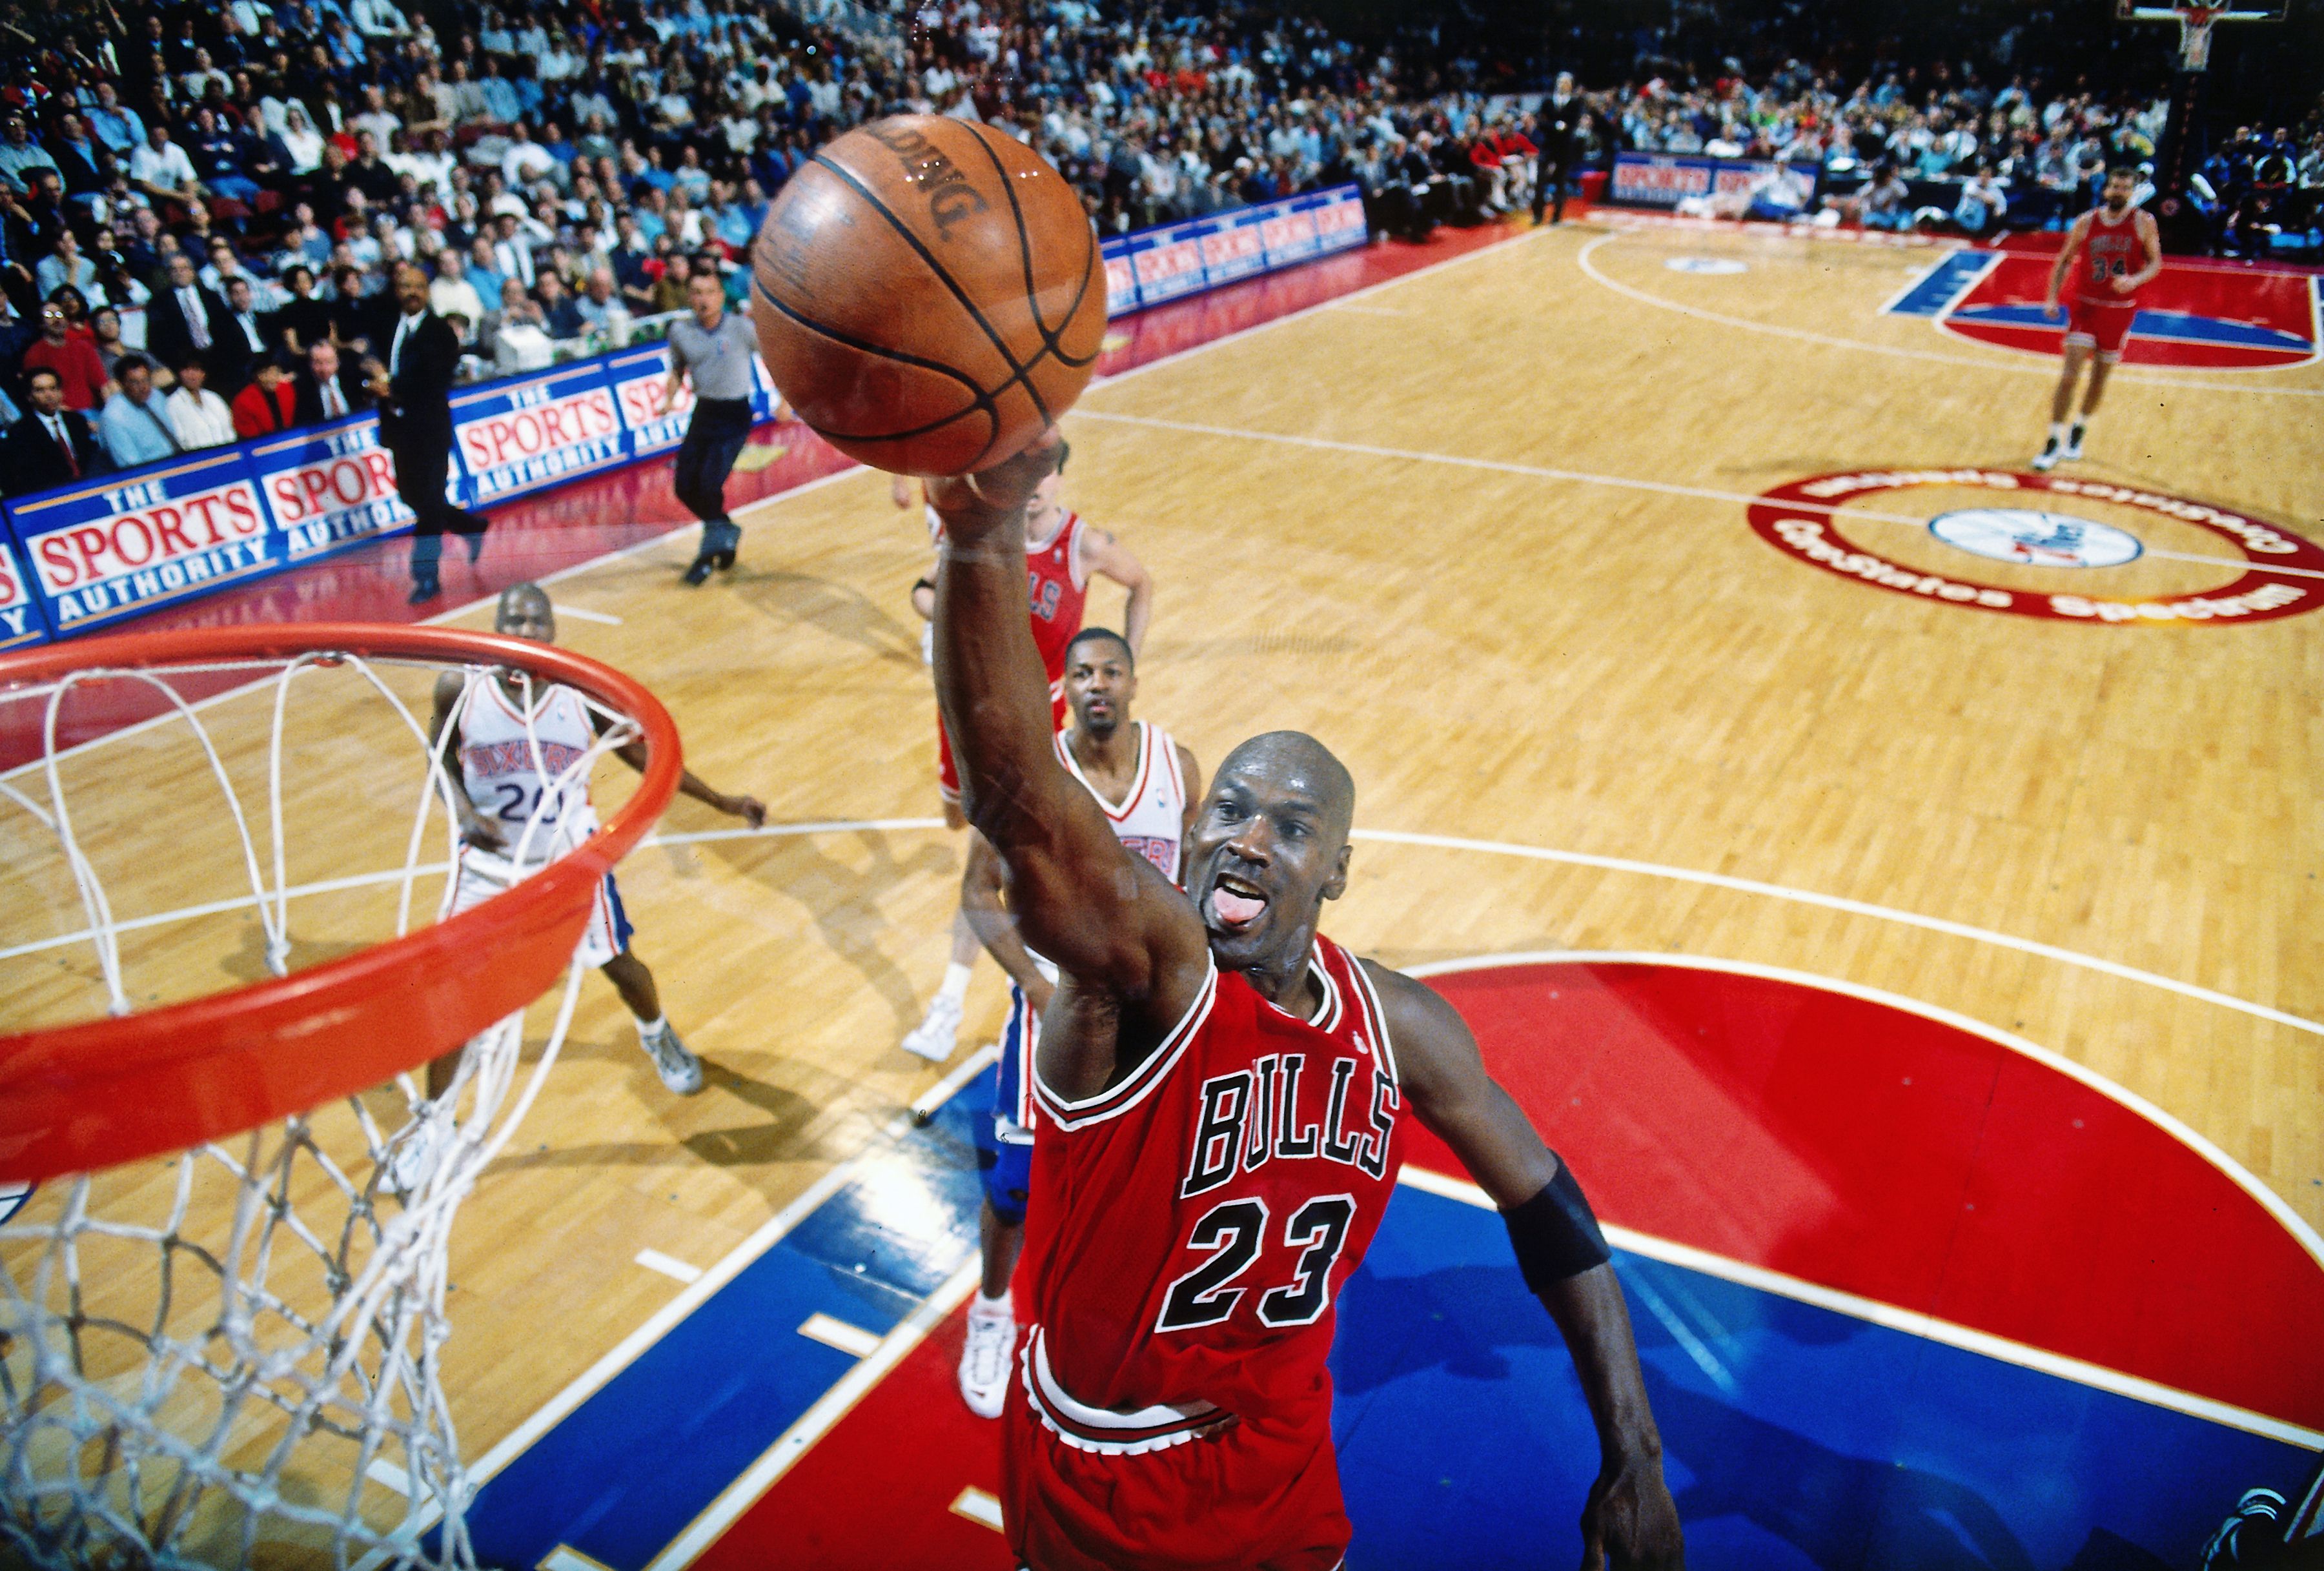  Michael Jordan scores his characteristic dunk against the Philadelphia 76ers in 1996 | Source: Getty Images